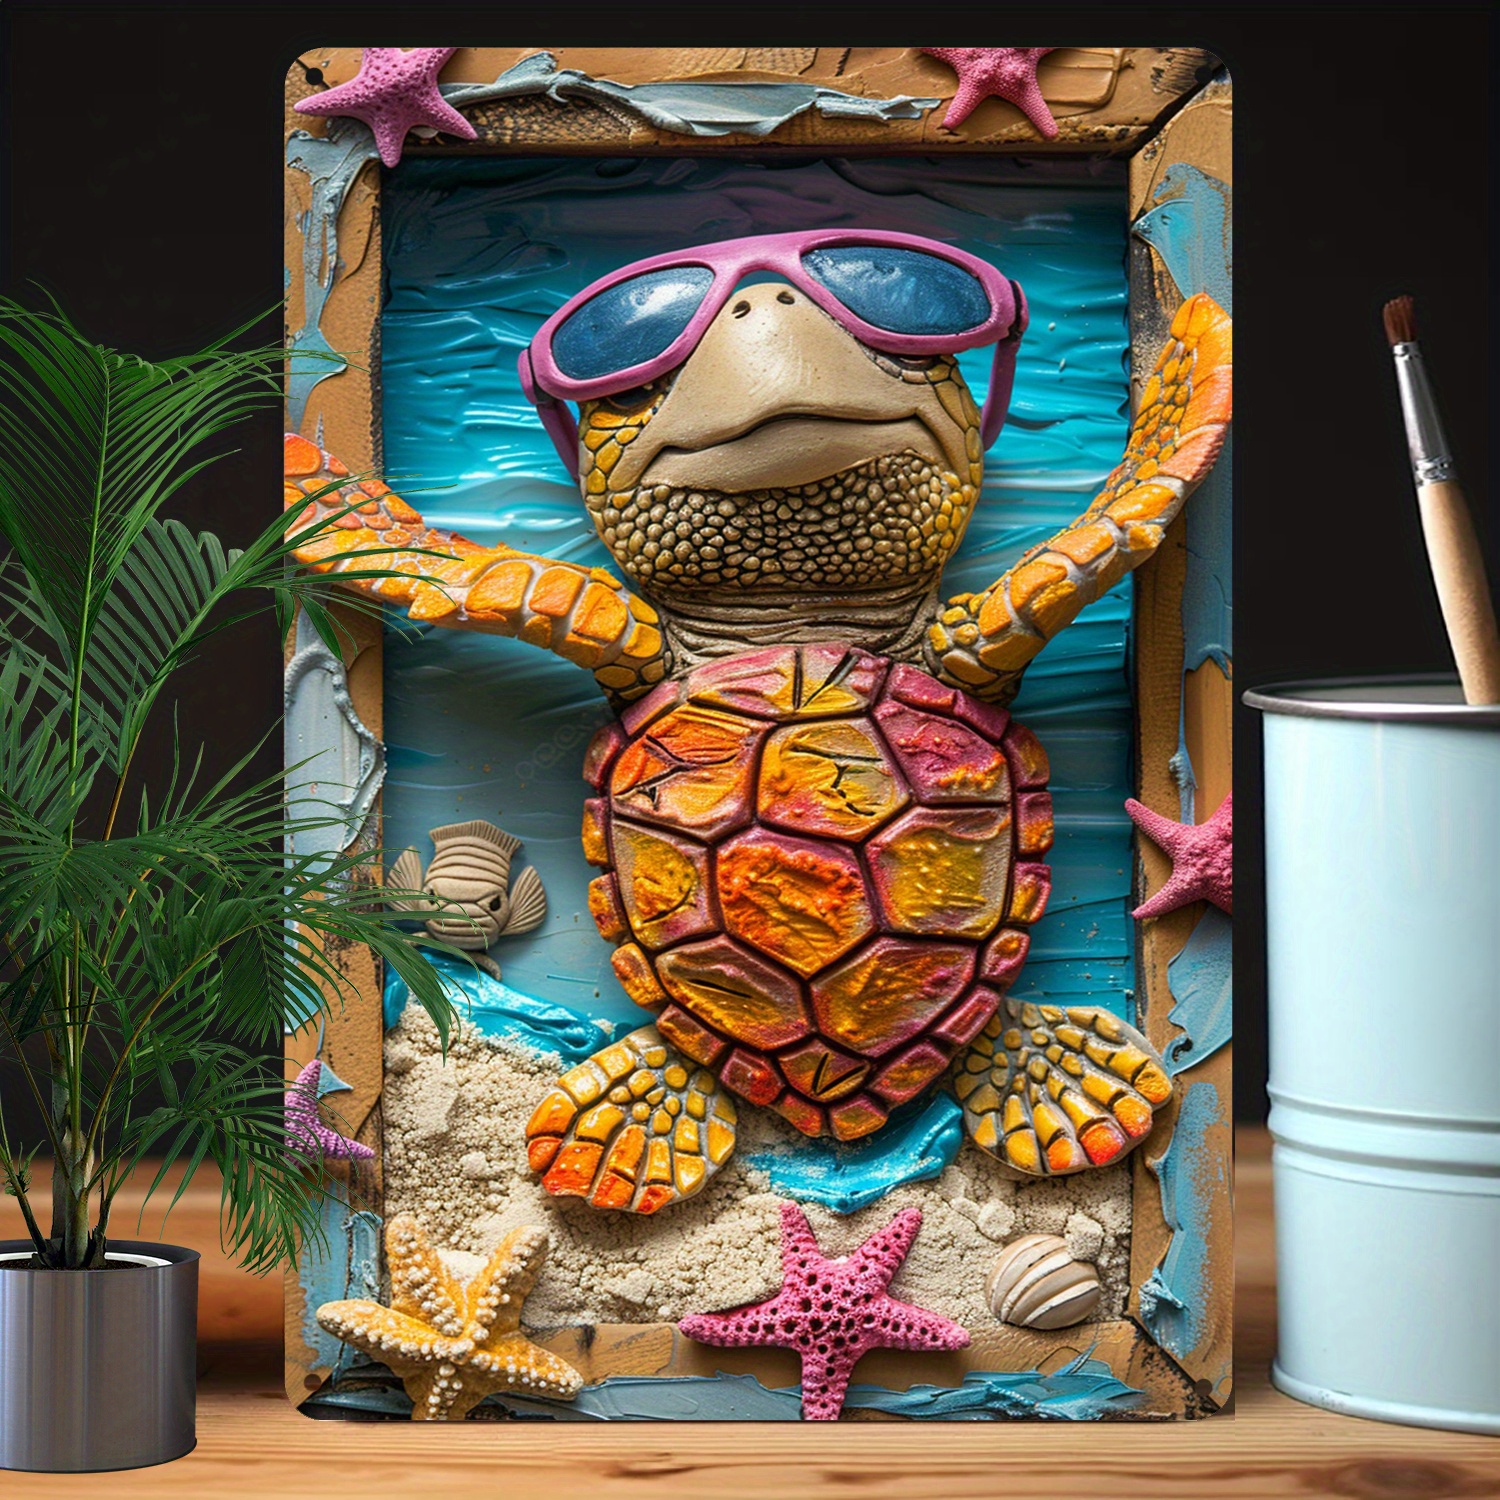 

1pc 3d Sea Turtle Metal Wall Art Decor With Sunglasses, Moisture Resistant Aluminum Sign For Home & Garden - Enhanced Bending Resistance, Ideal Gift For Beach Lovers A1044